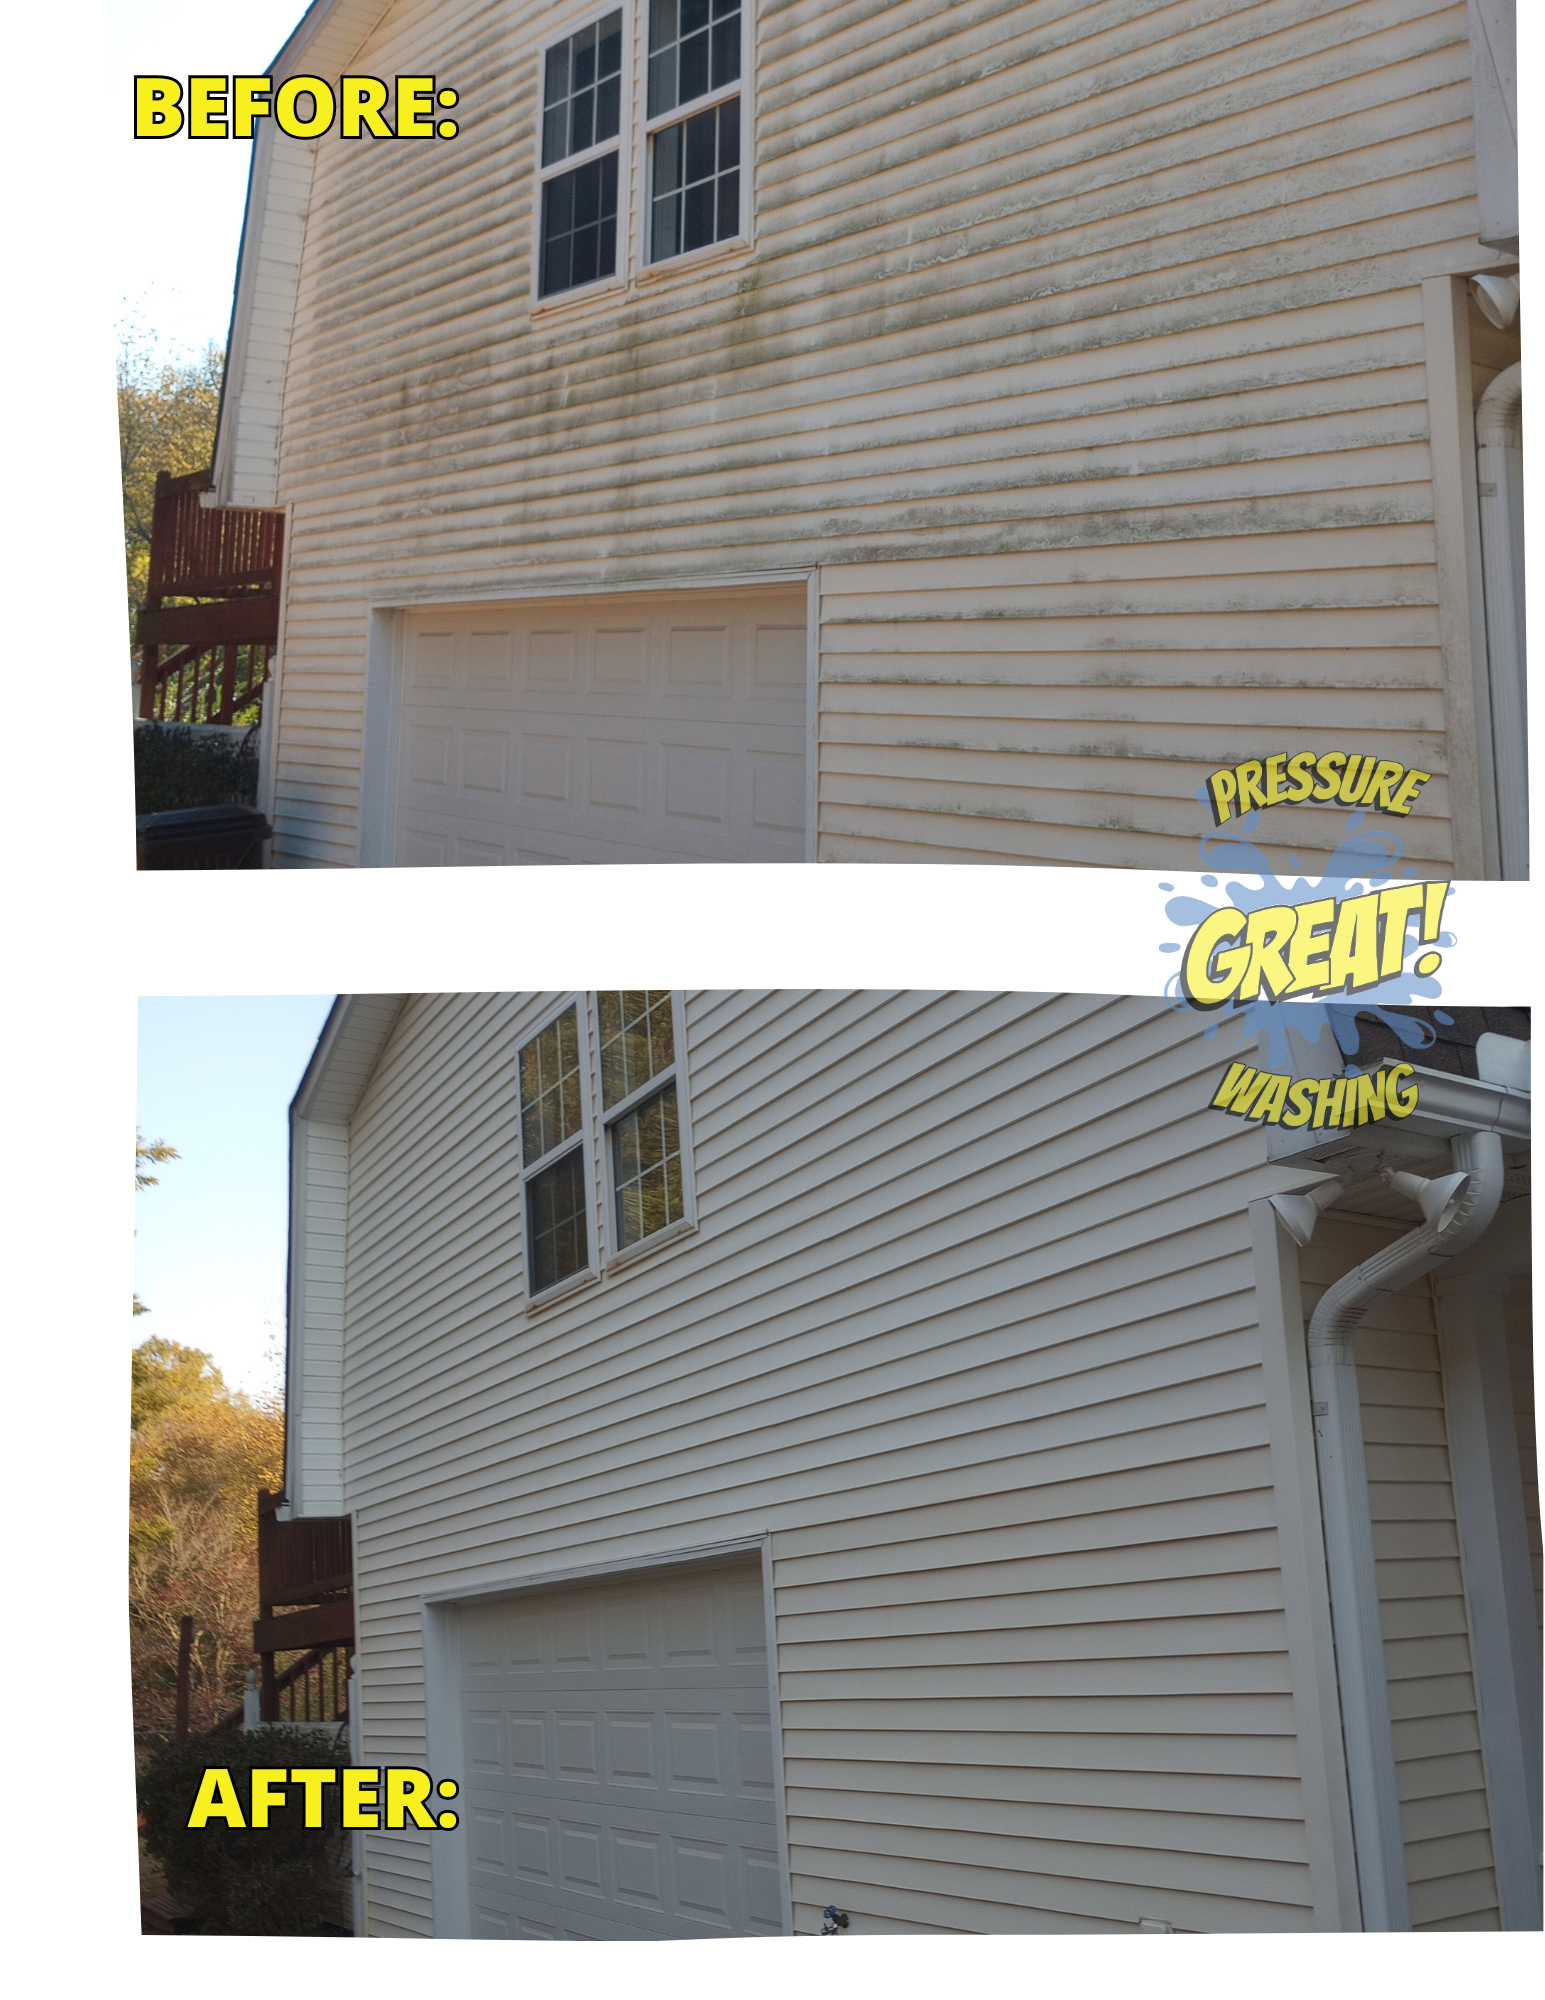 House Washing in Greenville South Carolina - Our GREAT! Value Special! Thumbnail